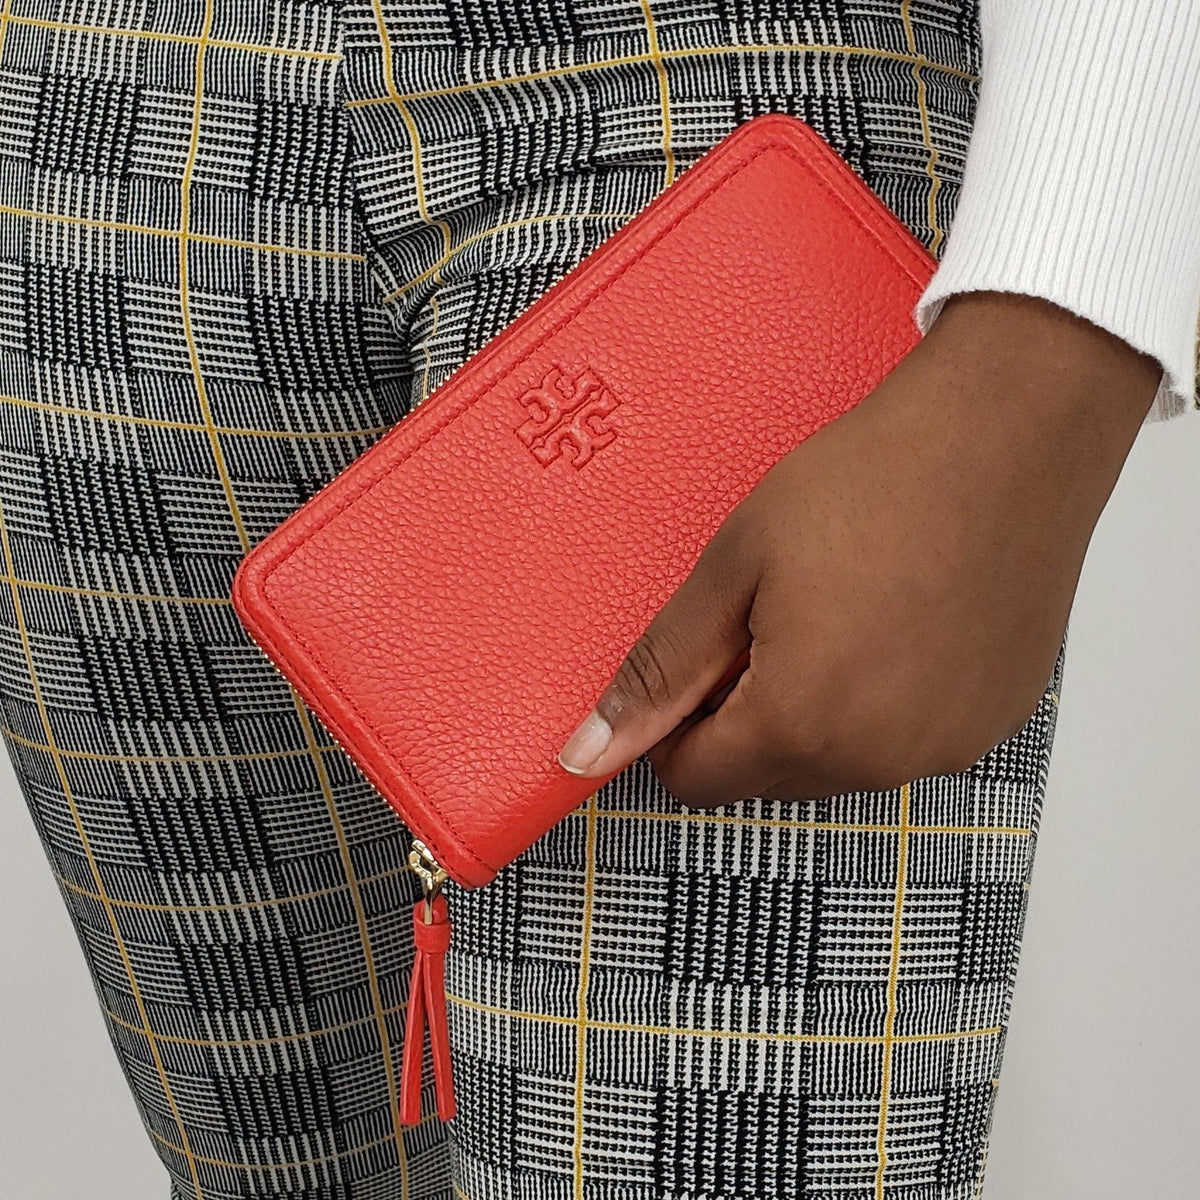 Tory Burch Thea Zip Continental Wallet in Brilliant Red – Gavriel.us